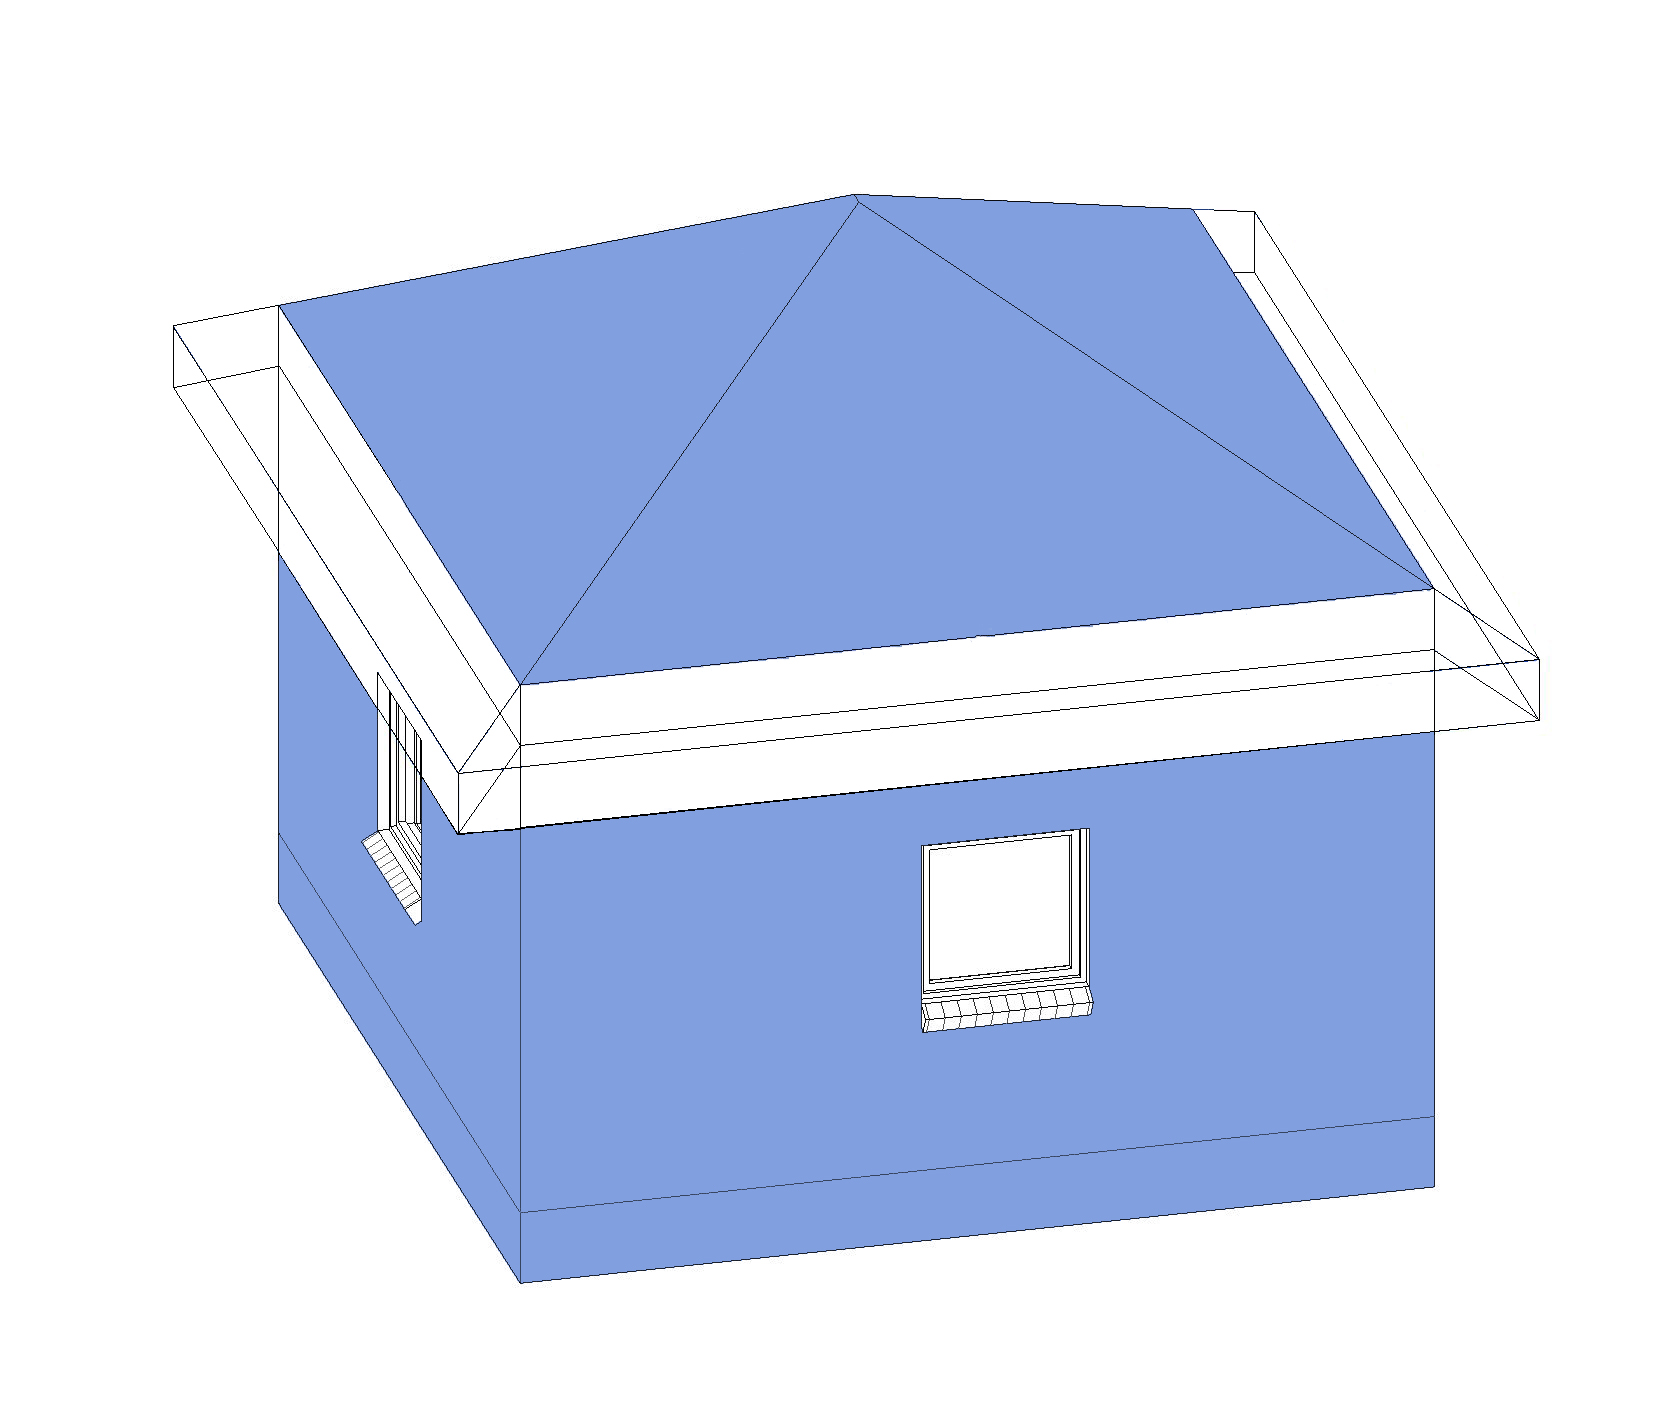 3D View of Roof with Eaves